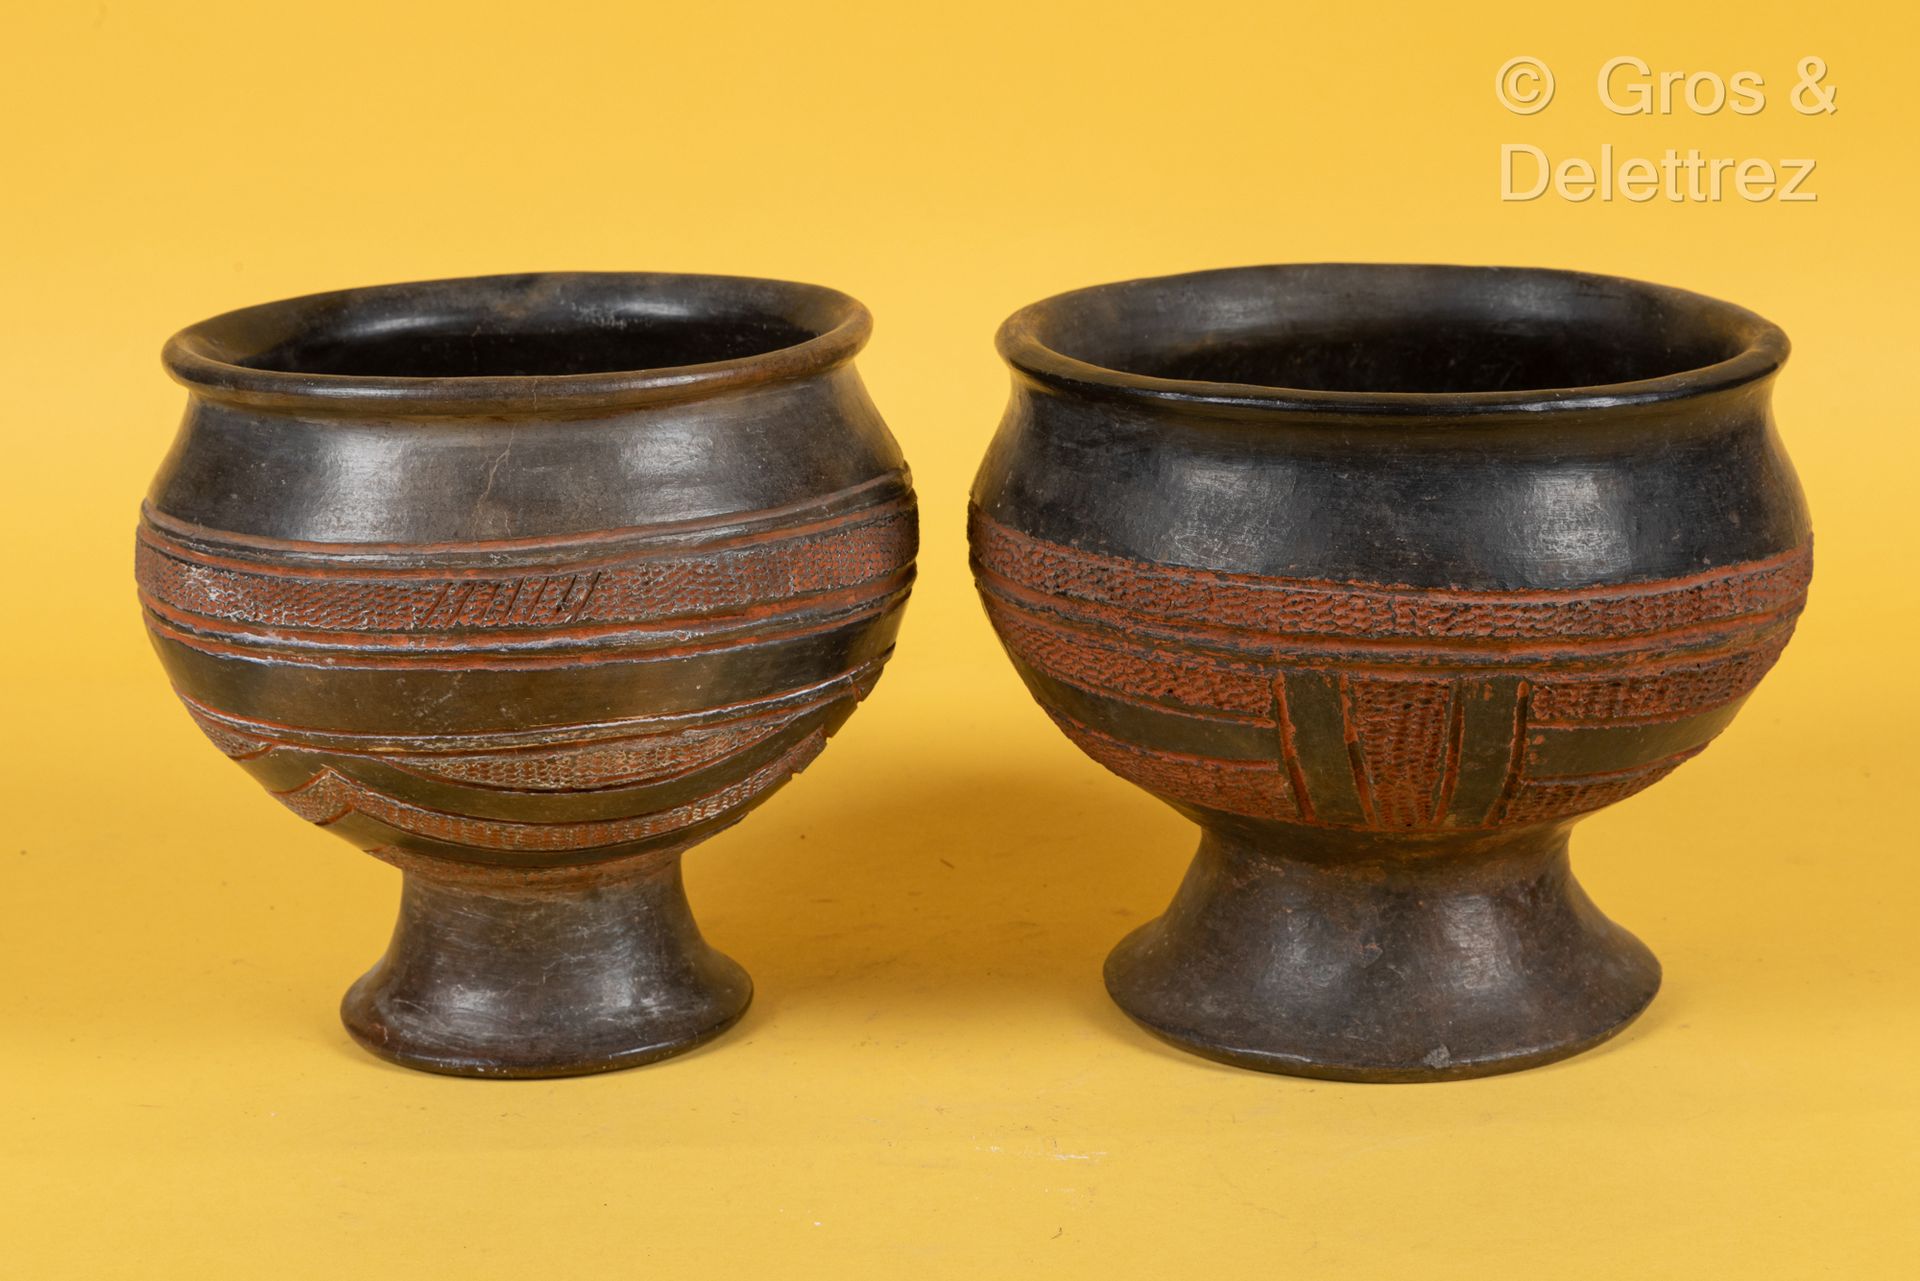 TCHAD Two pots in black terra cotta and red highlights with geometric patterns a&hellip;